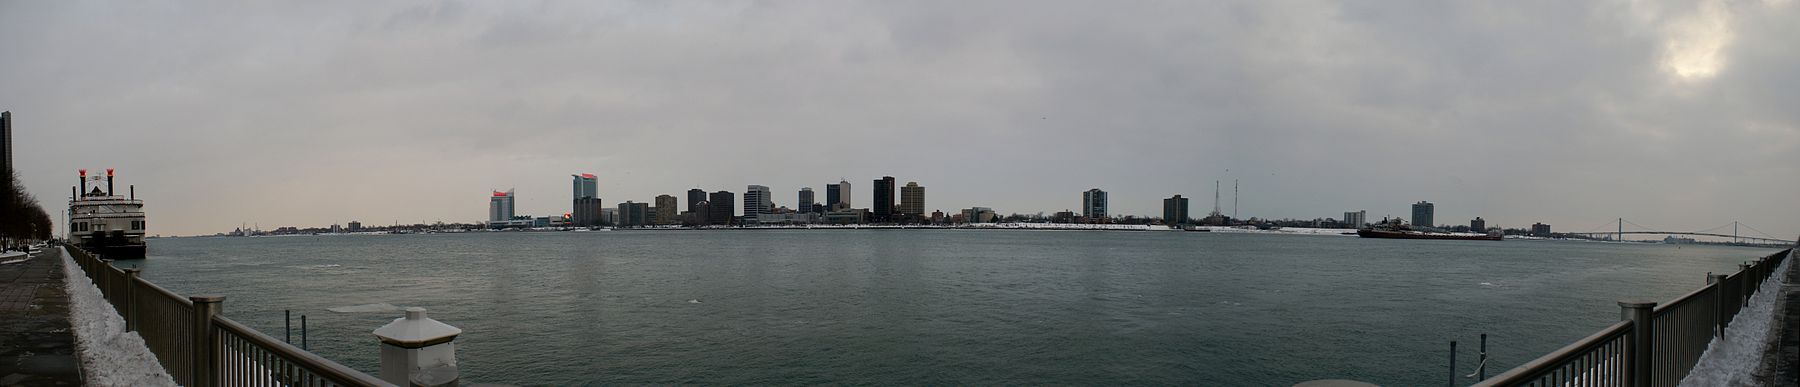 City of Windsor as Seen From Detroit